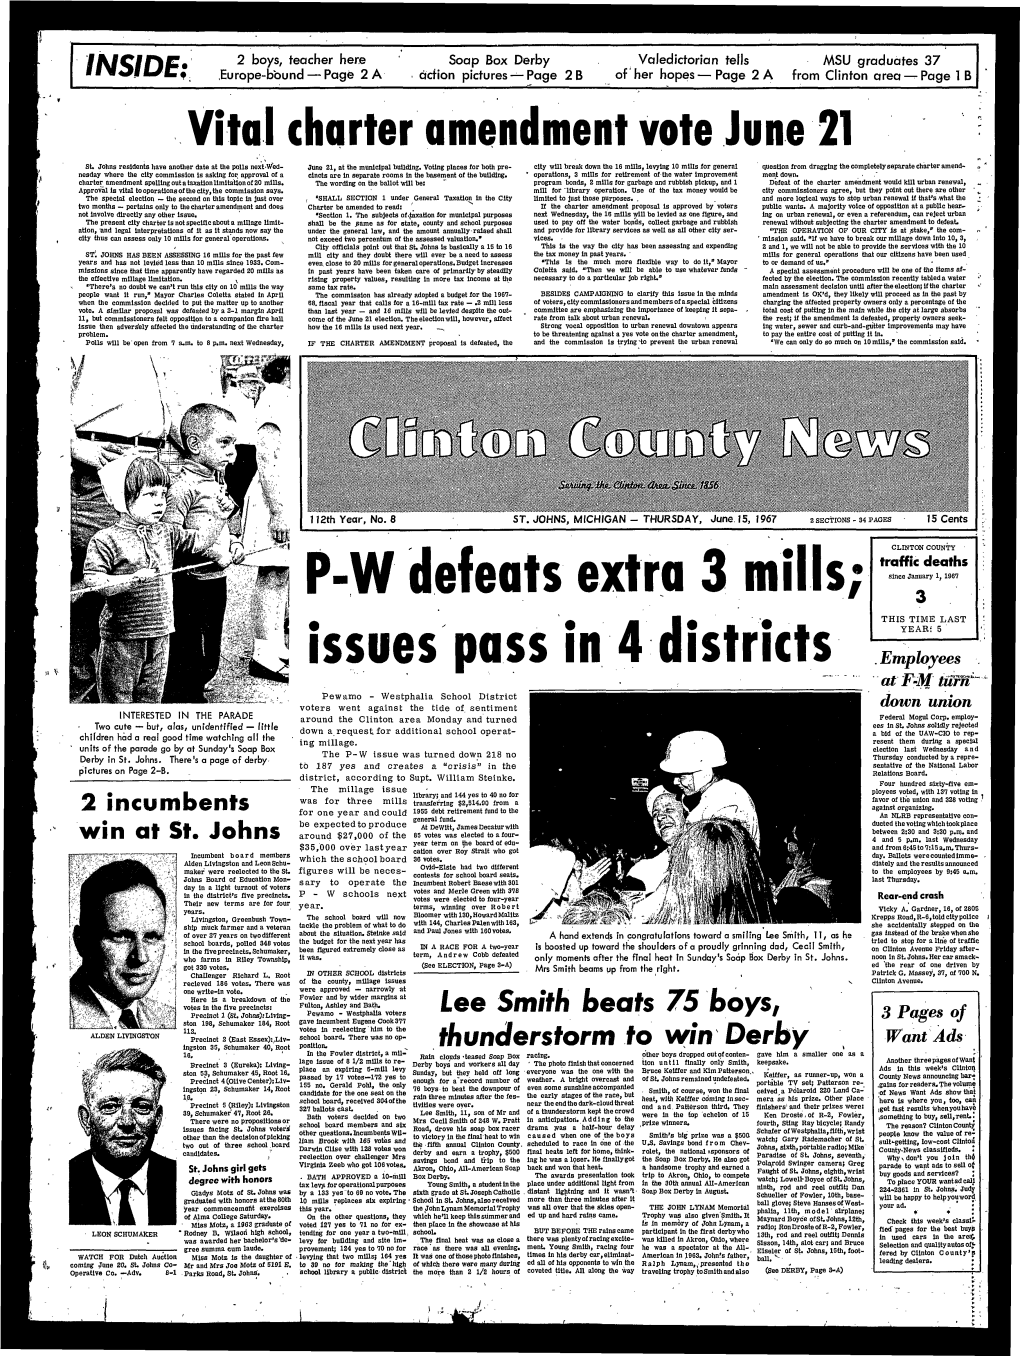 June 15, 1967 2 SECTIONS - 34 PAGES 15 Cents